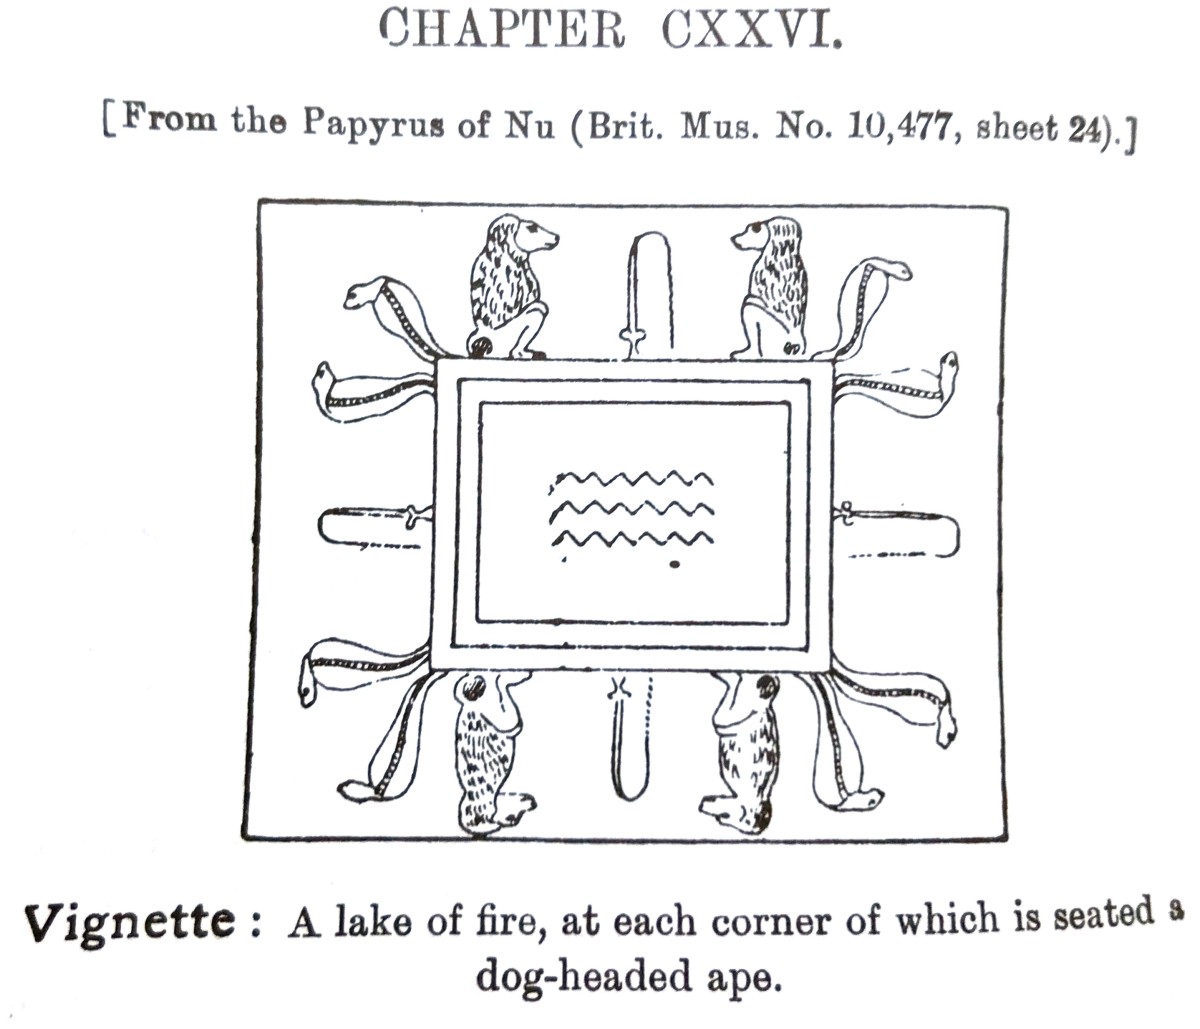  image taken from E A Wallis Budge's translation of the Book of the Dead, which shows the Lake with uraeus serpents at the corners